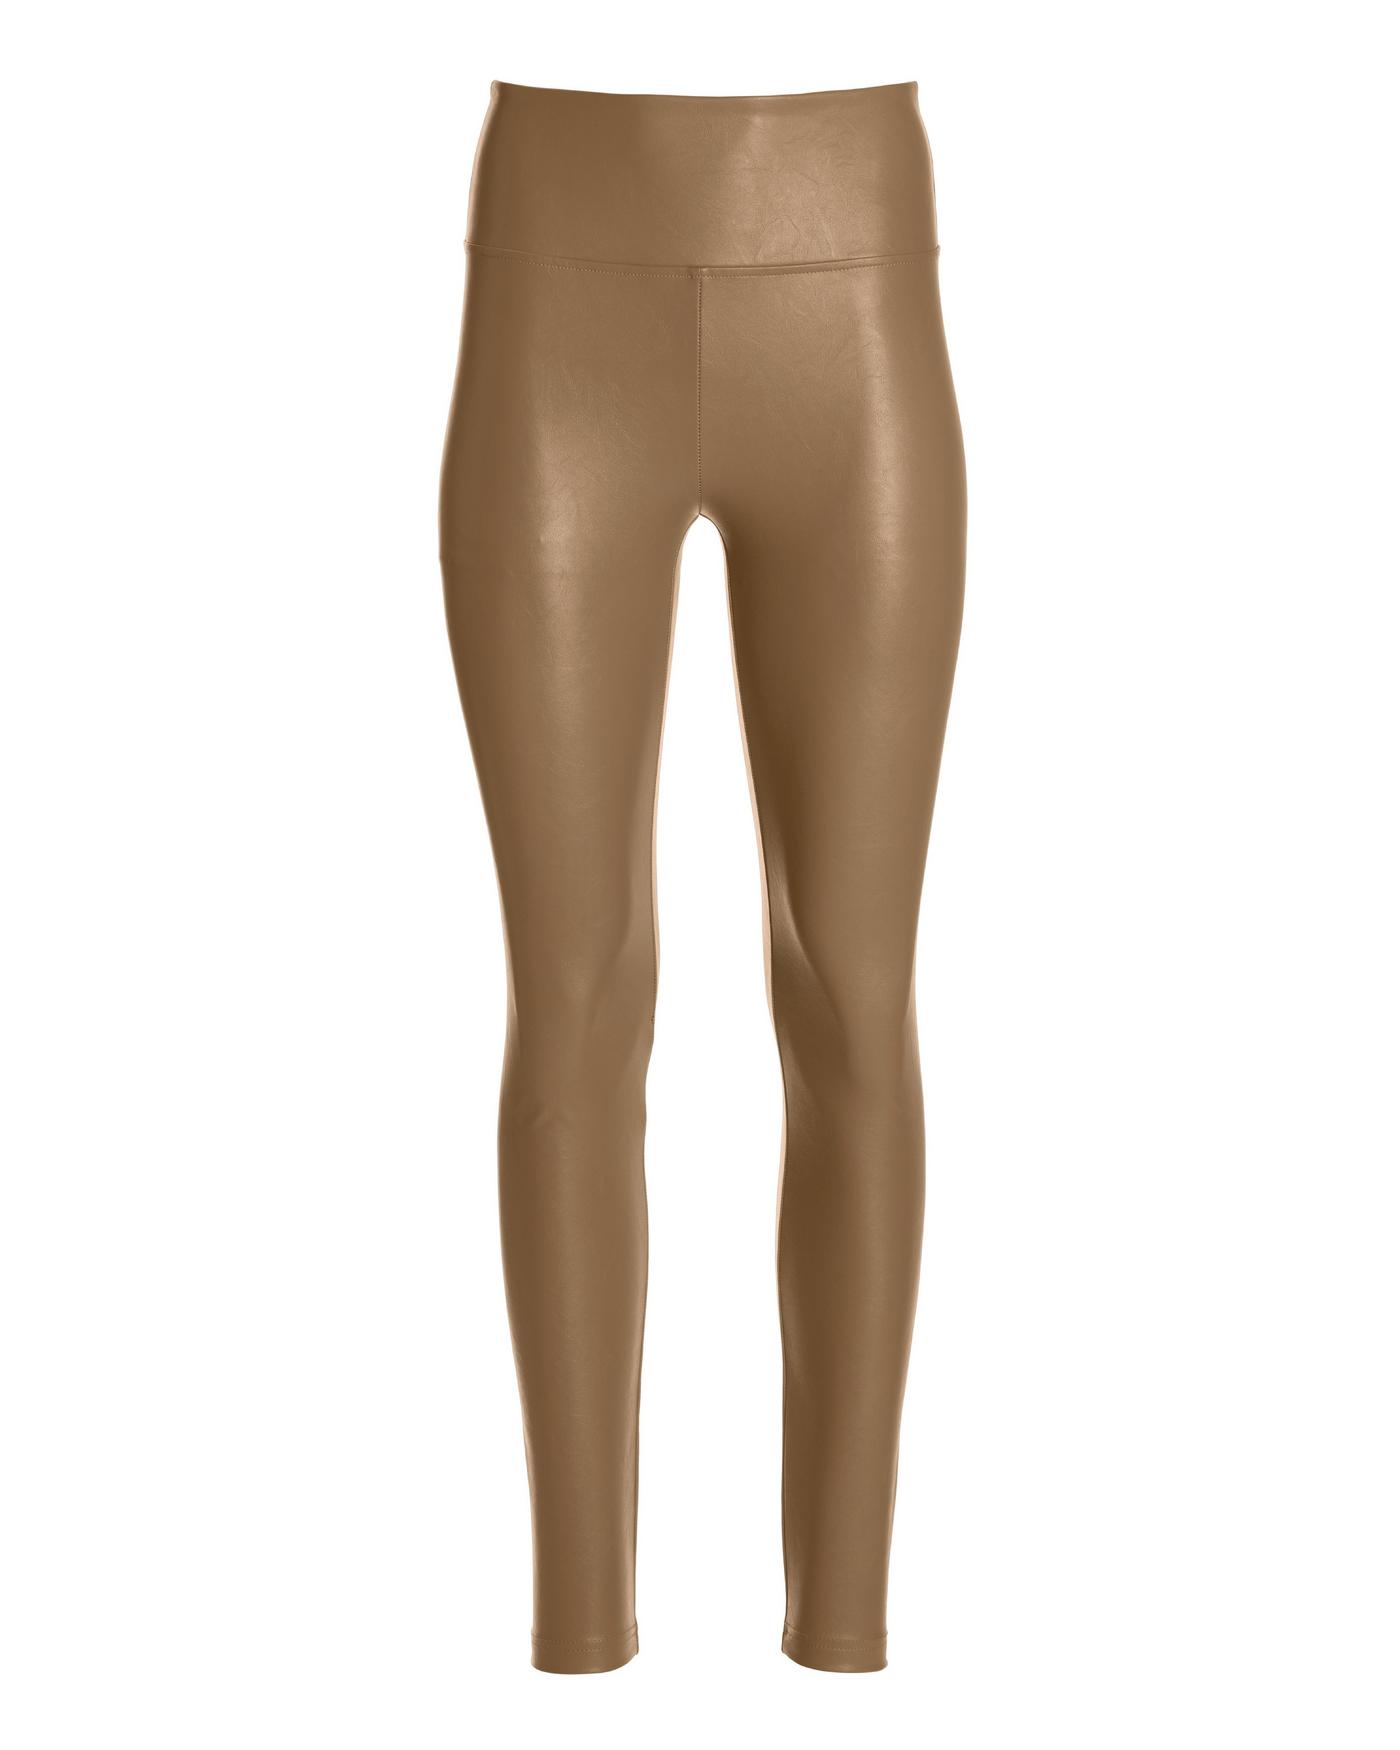 Aspen Faux Leather Pull On Legging - Taupe